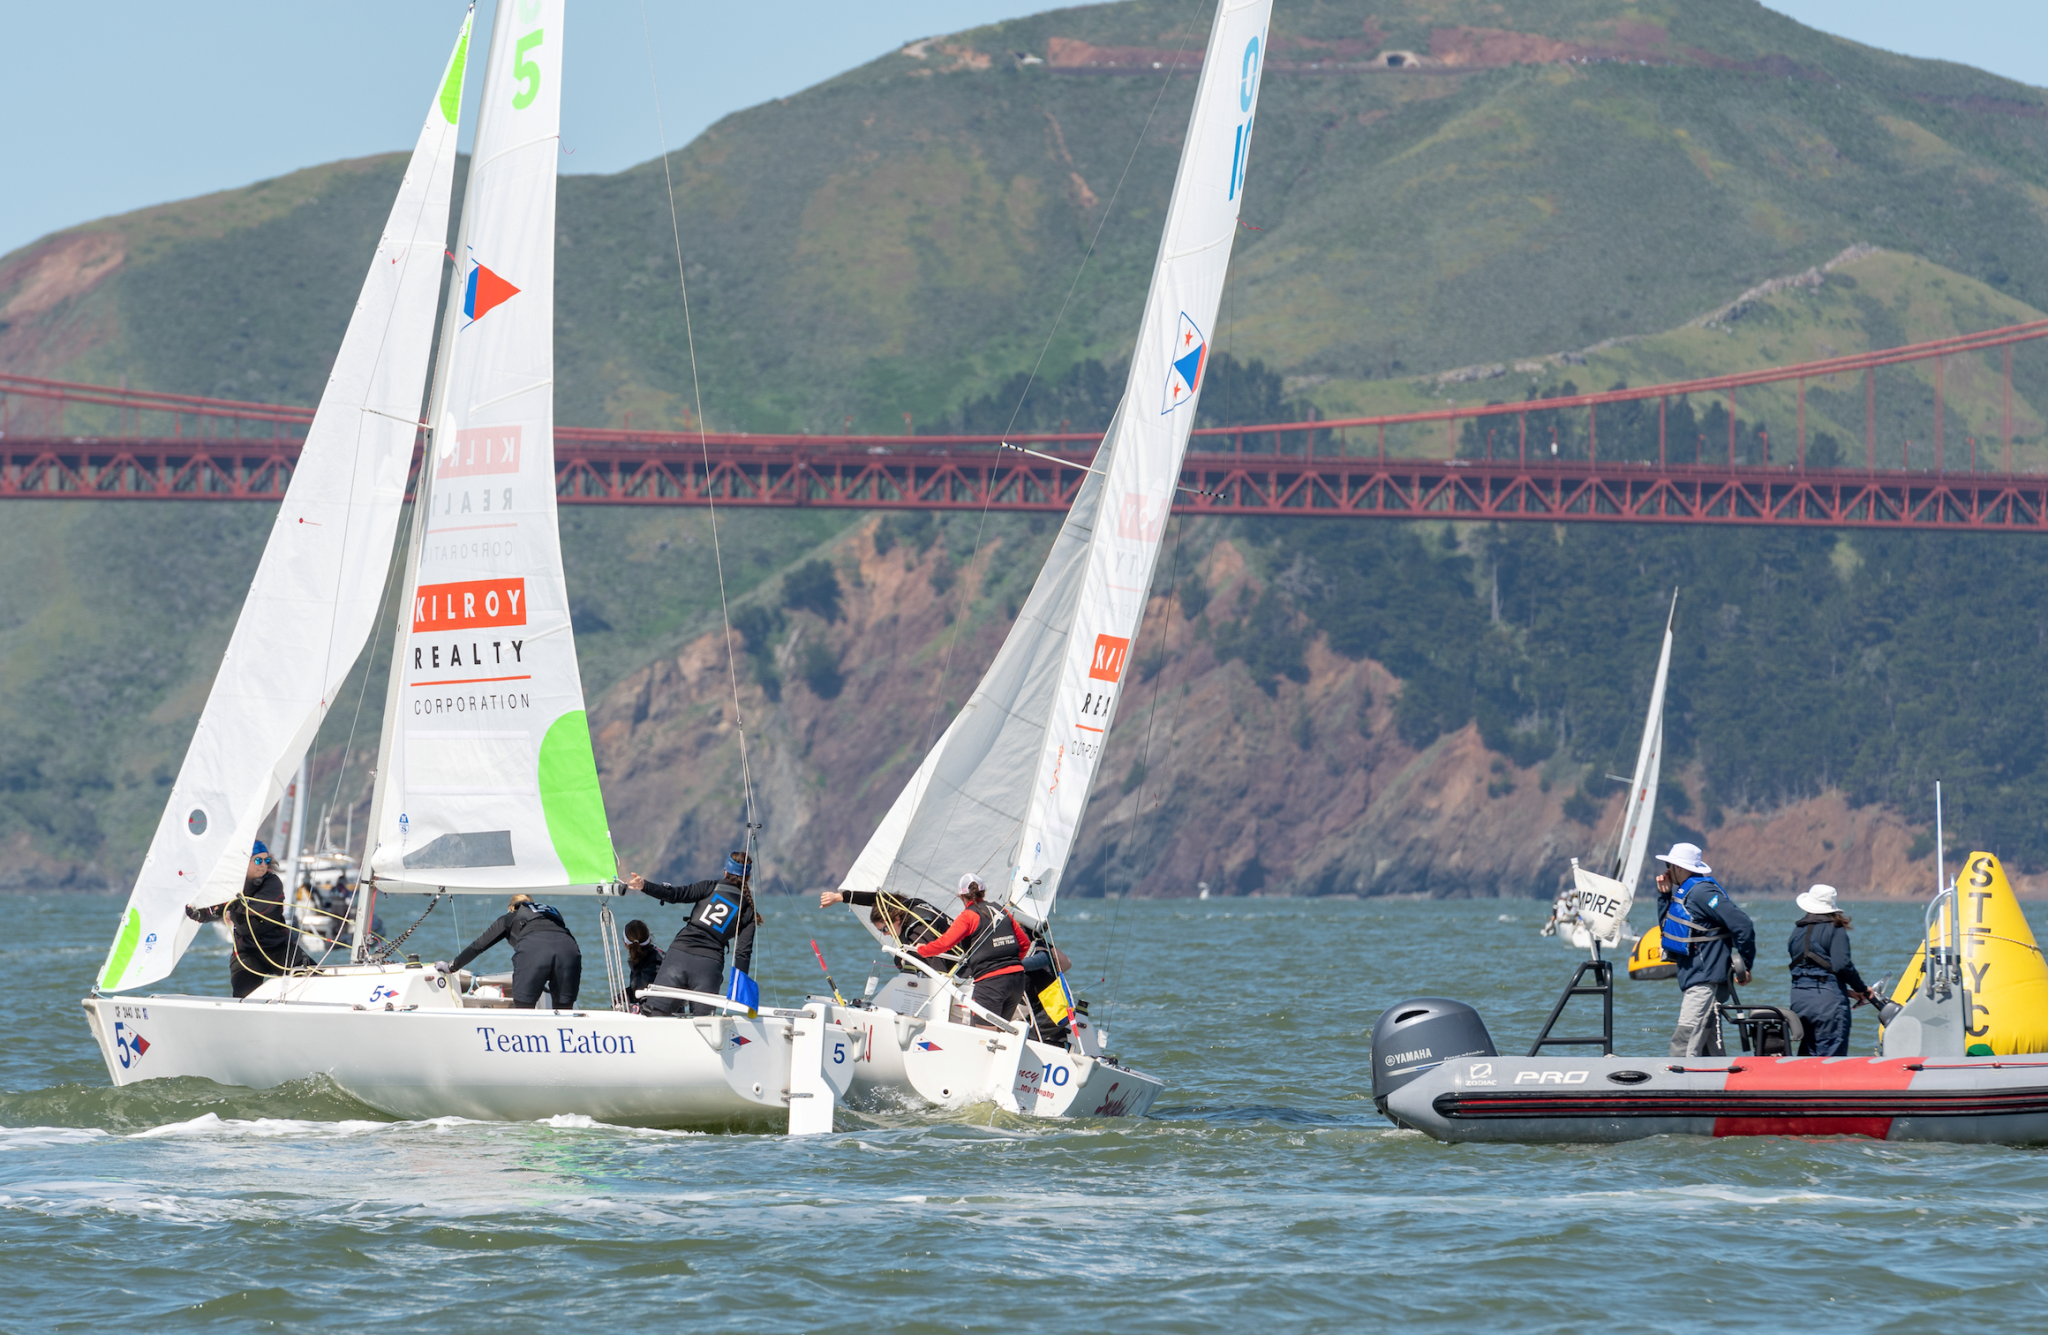  Match Racing  Nations Cup Grand Final  San Francisco CA, USA  Day 2  Mesnil leads Open, Breault undefeated in Women’s Division